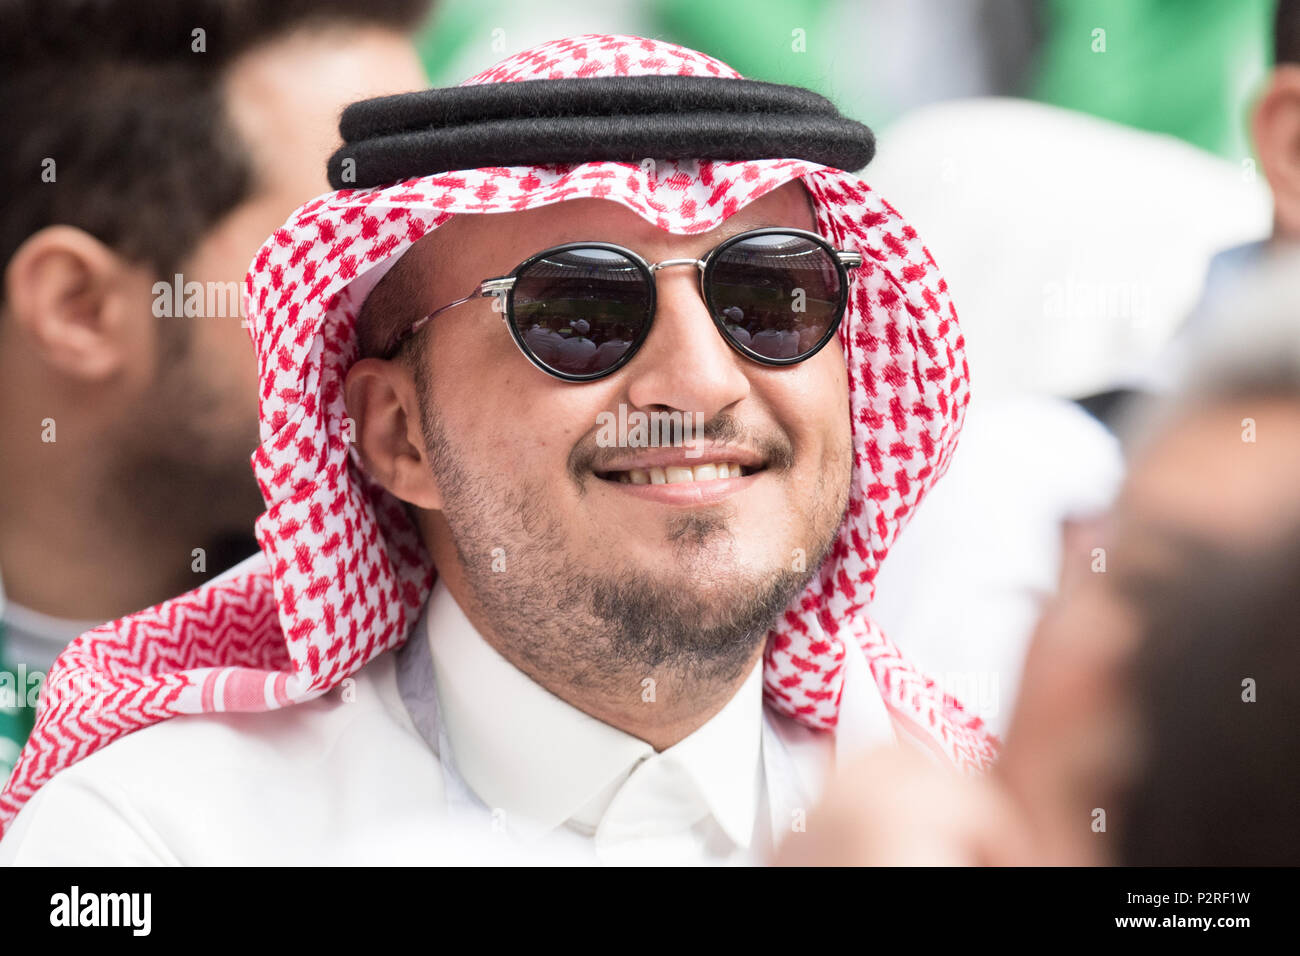 A Saudi Arabian fan in traditional clothing, bust, fan, fans, spectators, supporters, supporters, Russia (RUS) - Saudi Arabia (KSA) 5: 0, preliminary round, group A, match 1, on 14.06.2018 in Moscow ; Football World Cup 2018 in Russia from 14.06. - 15.07.2018. | usage worldwide Stock Photo